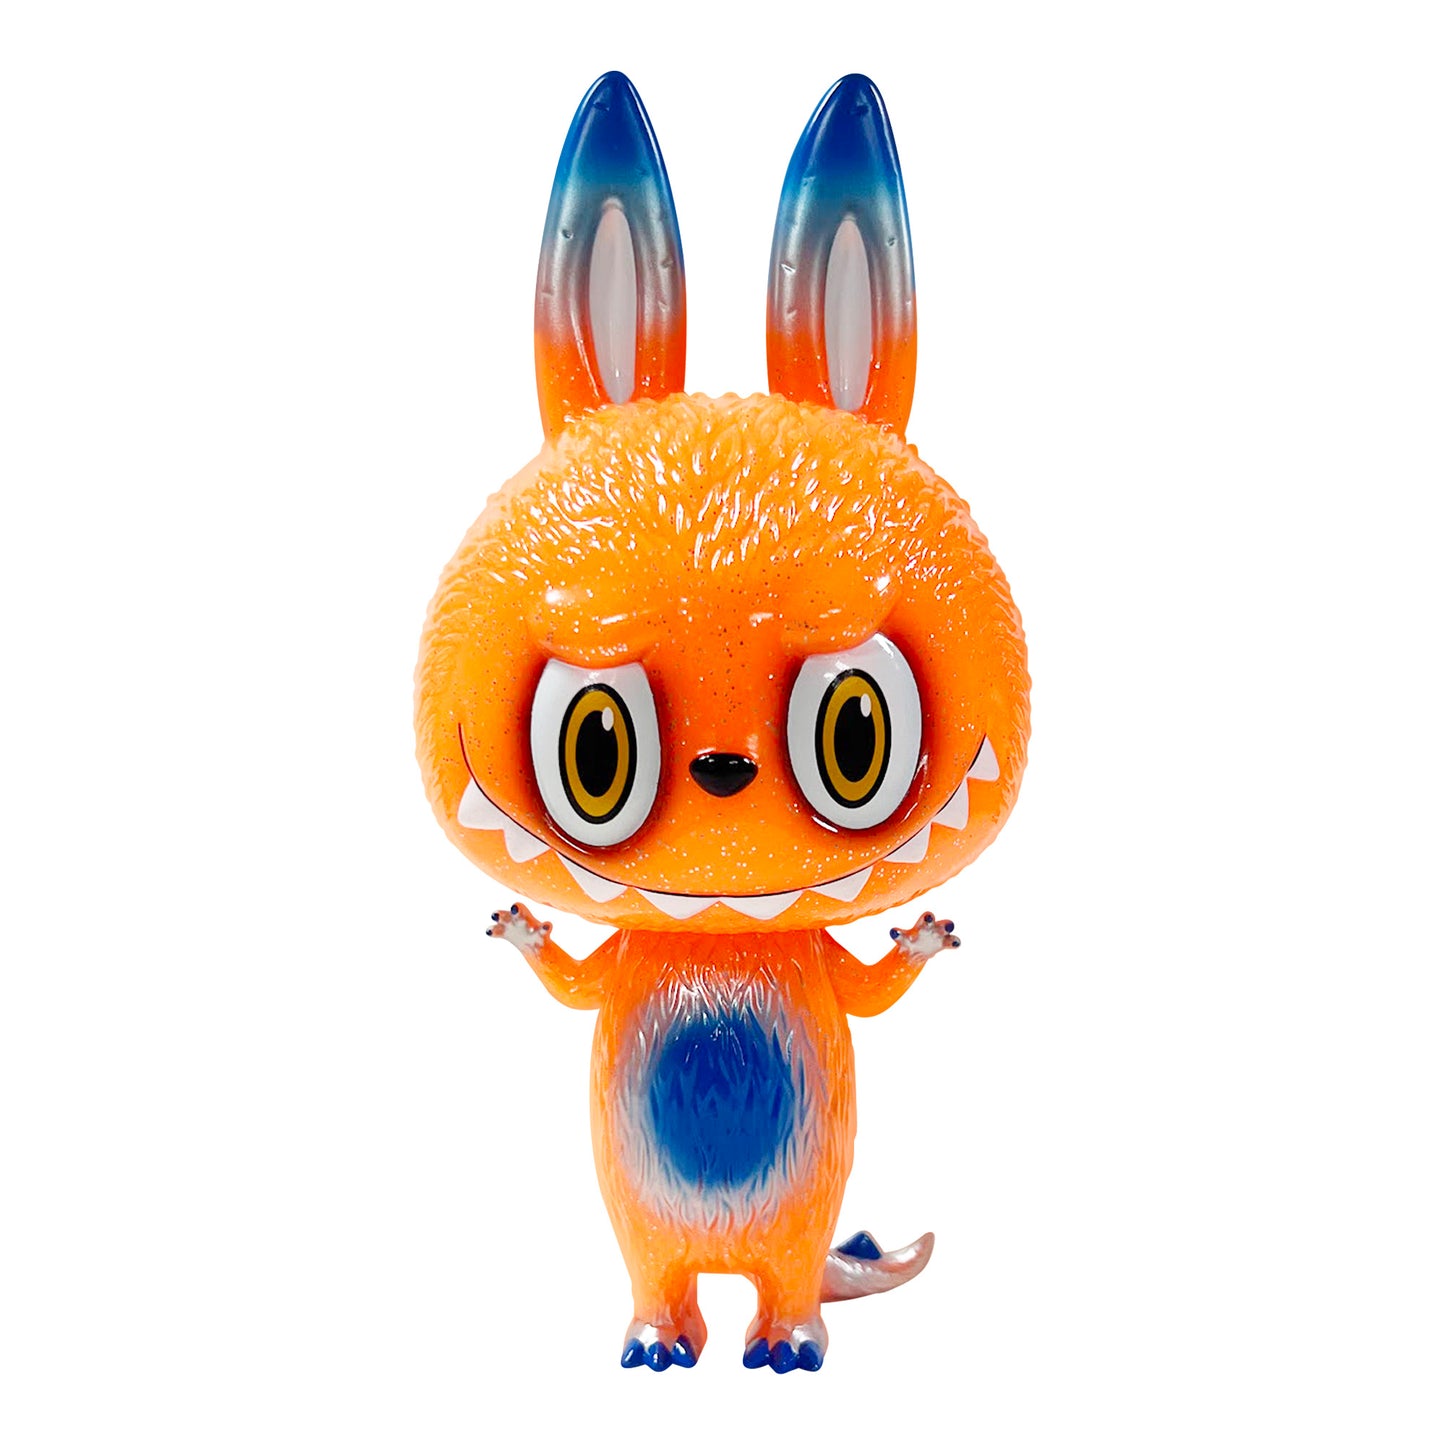 How2Work x Kasing Lung - Zimomo Toy Tokyo Exclusive